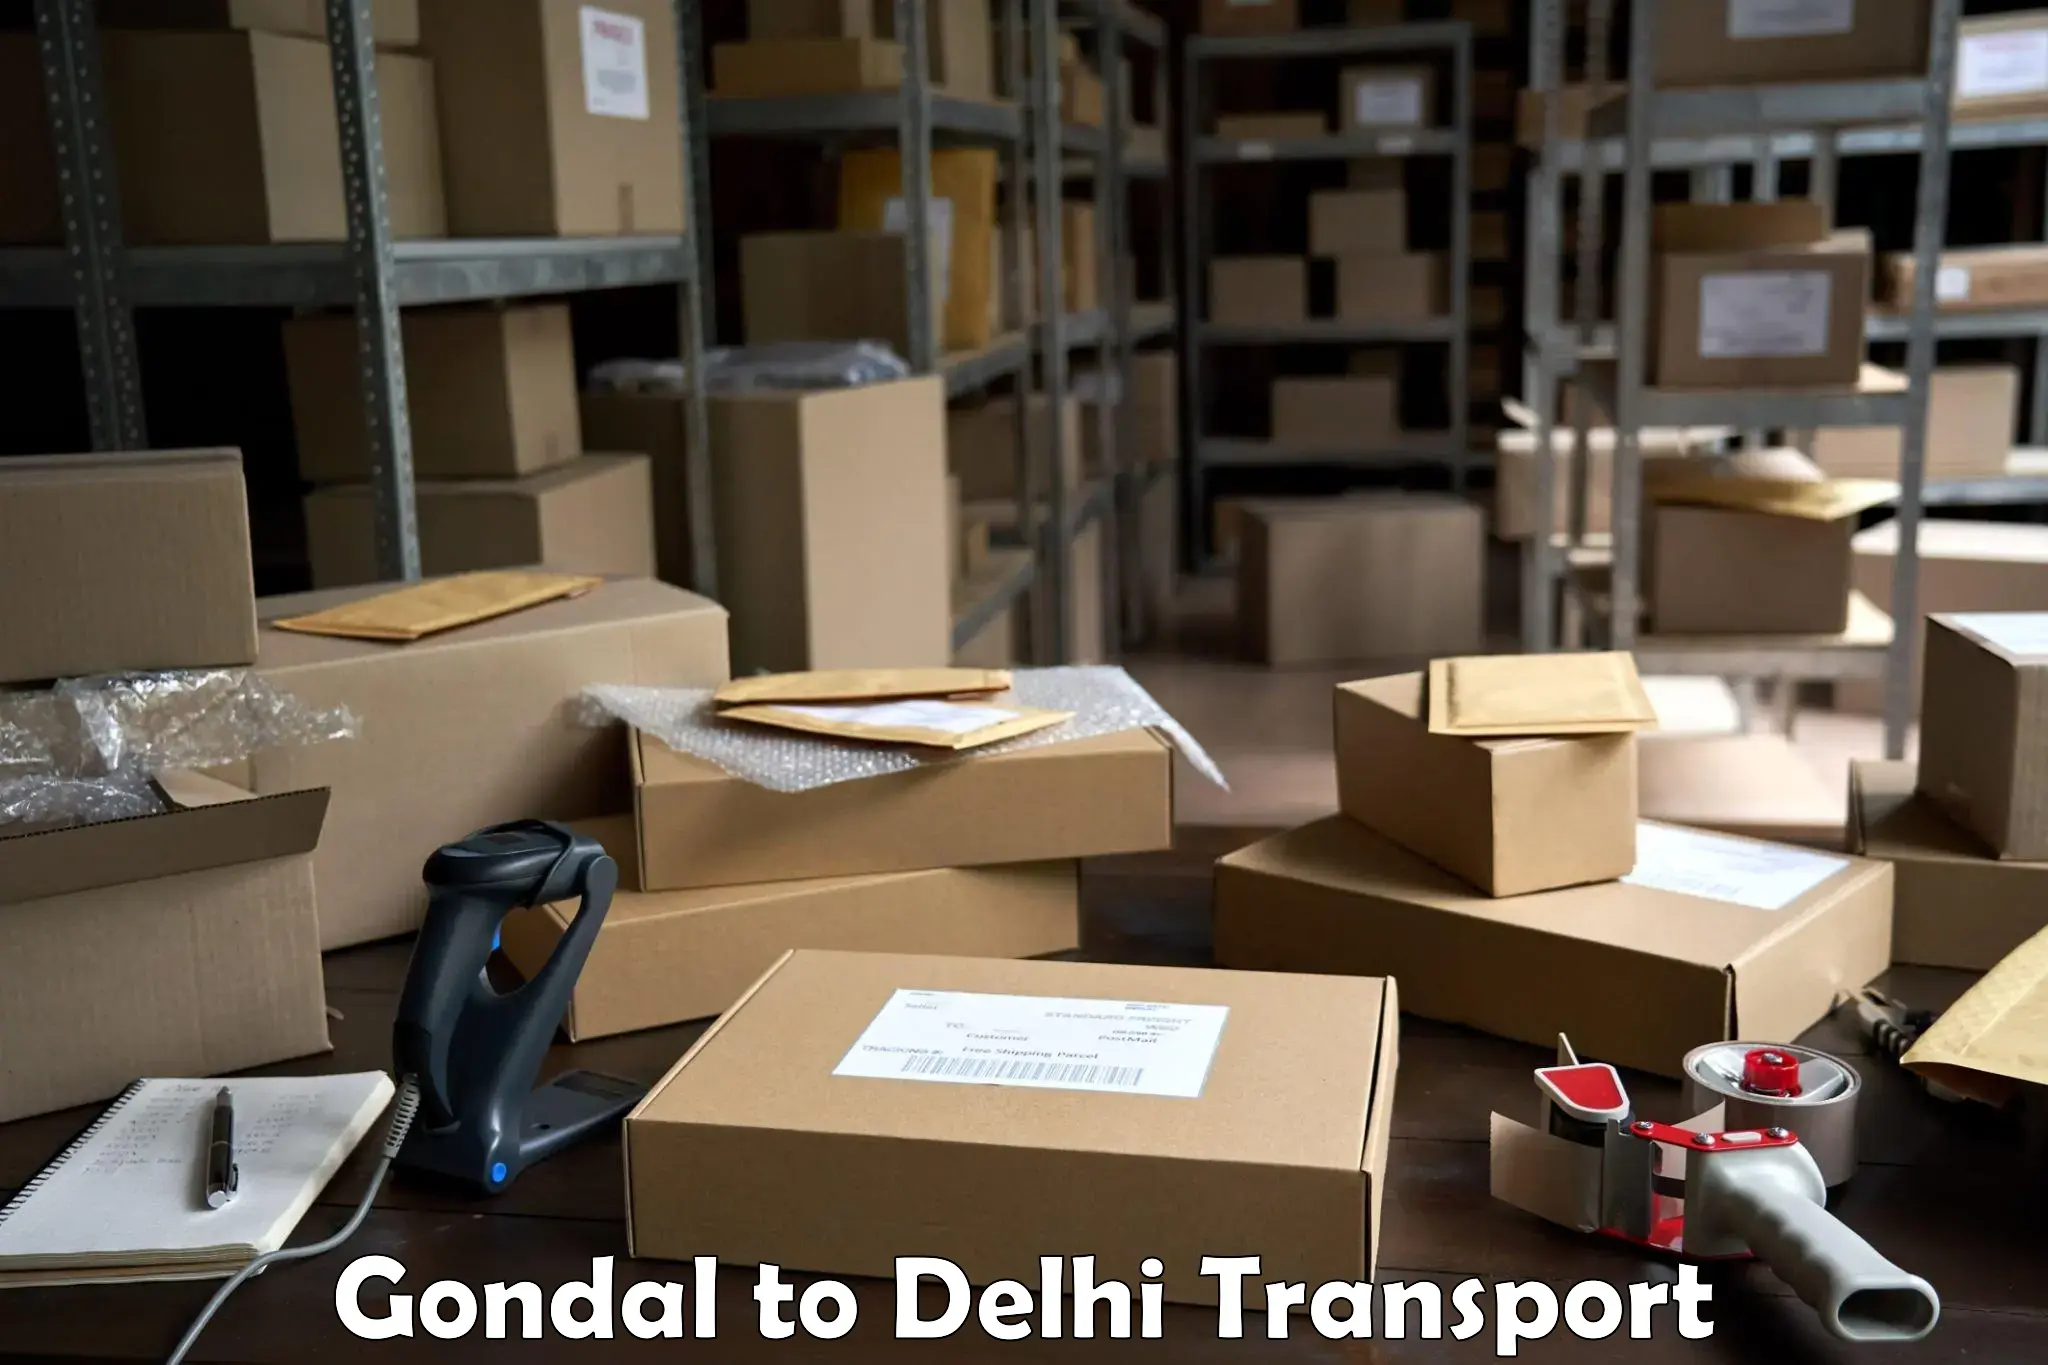 Express transport services Gondal to Lodhi Road